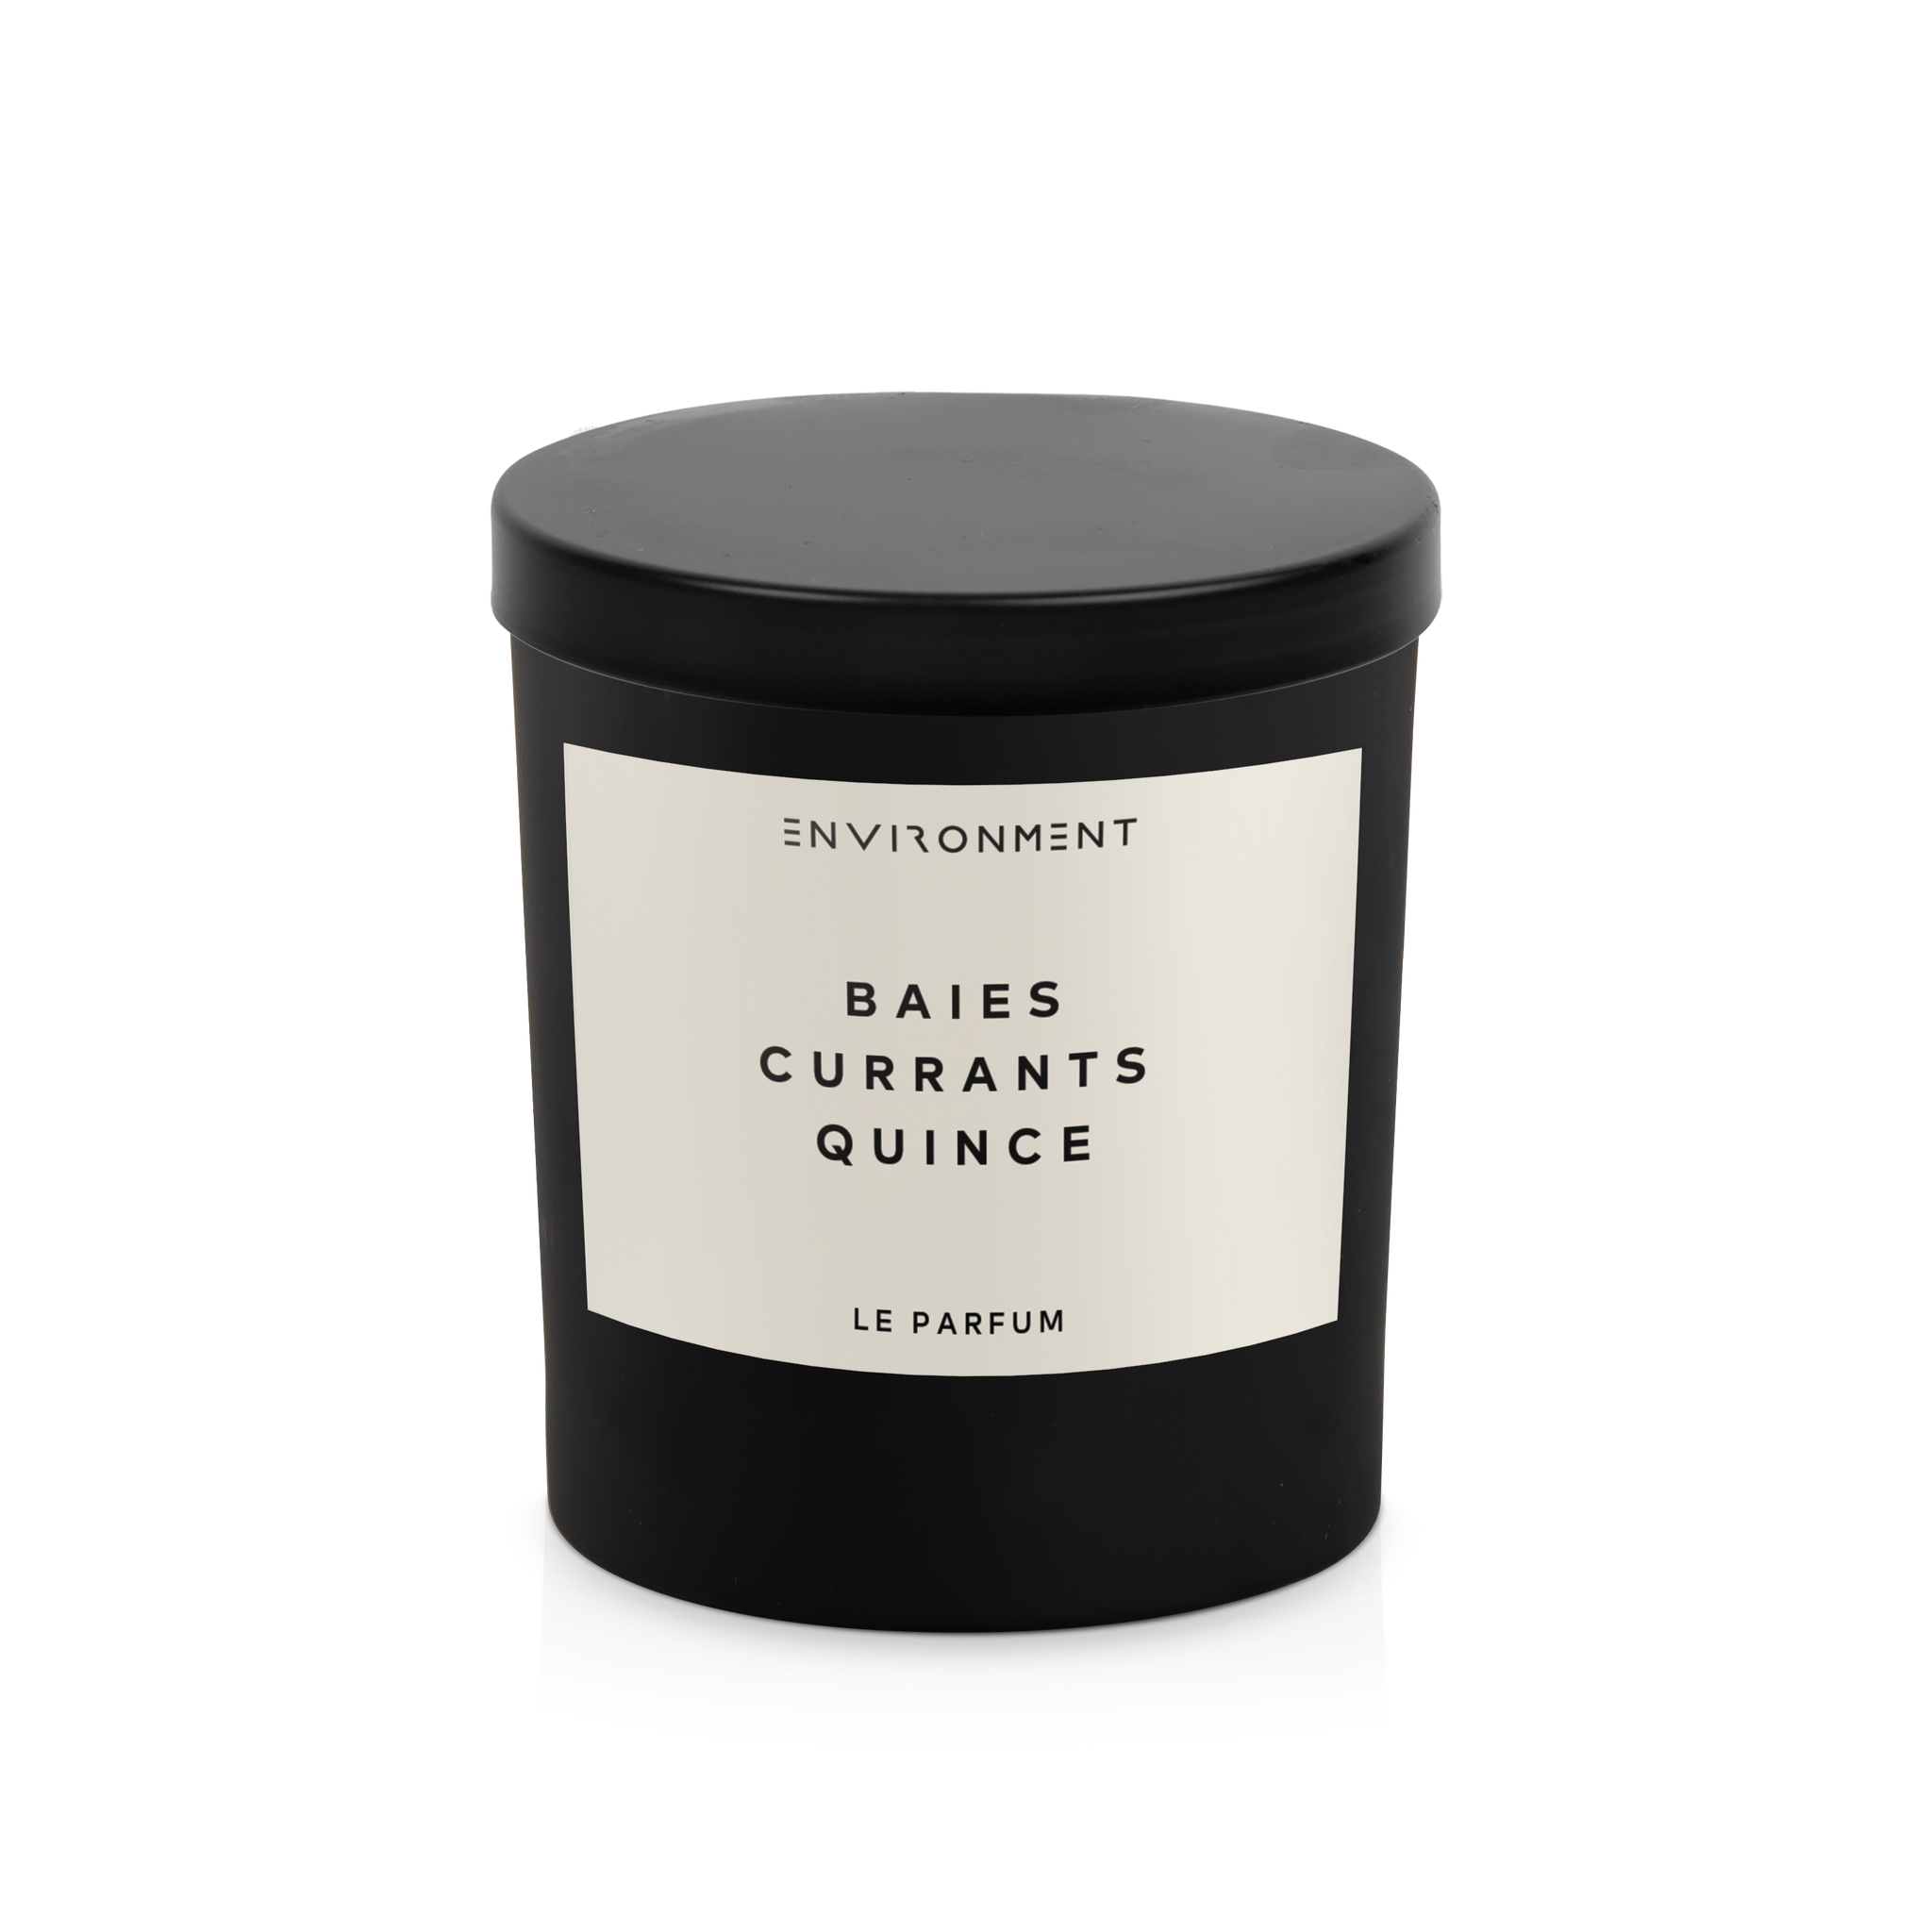 Baies | Currants | Quince 200ml Diffuser and 8oz Candle Gift Pack (Inspired by Diptyque Baies®)